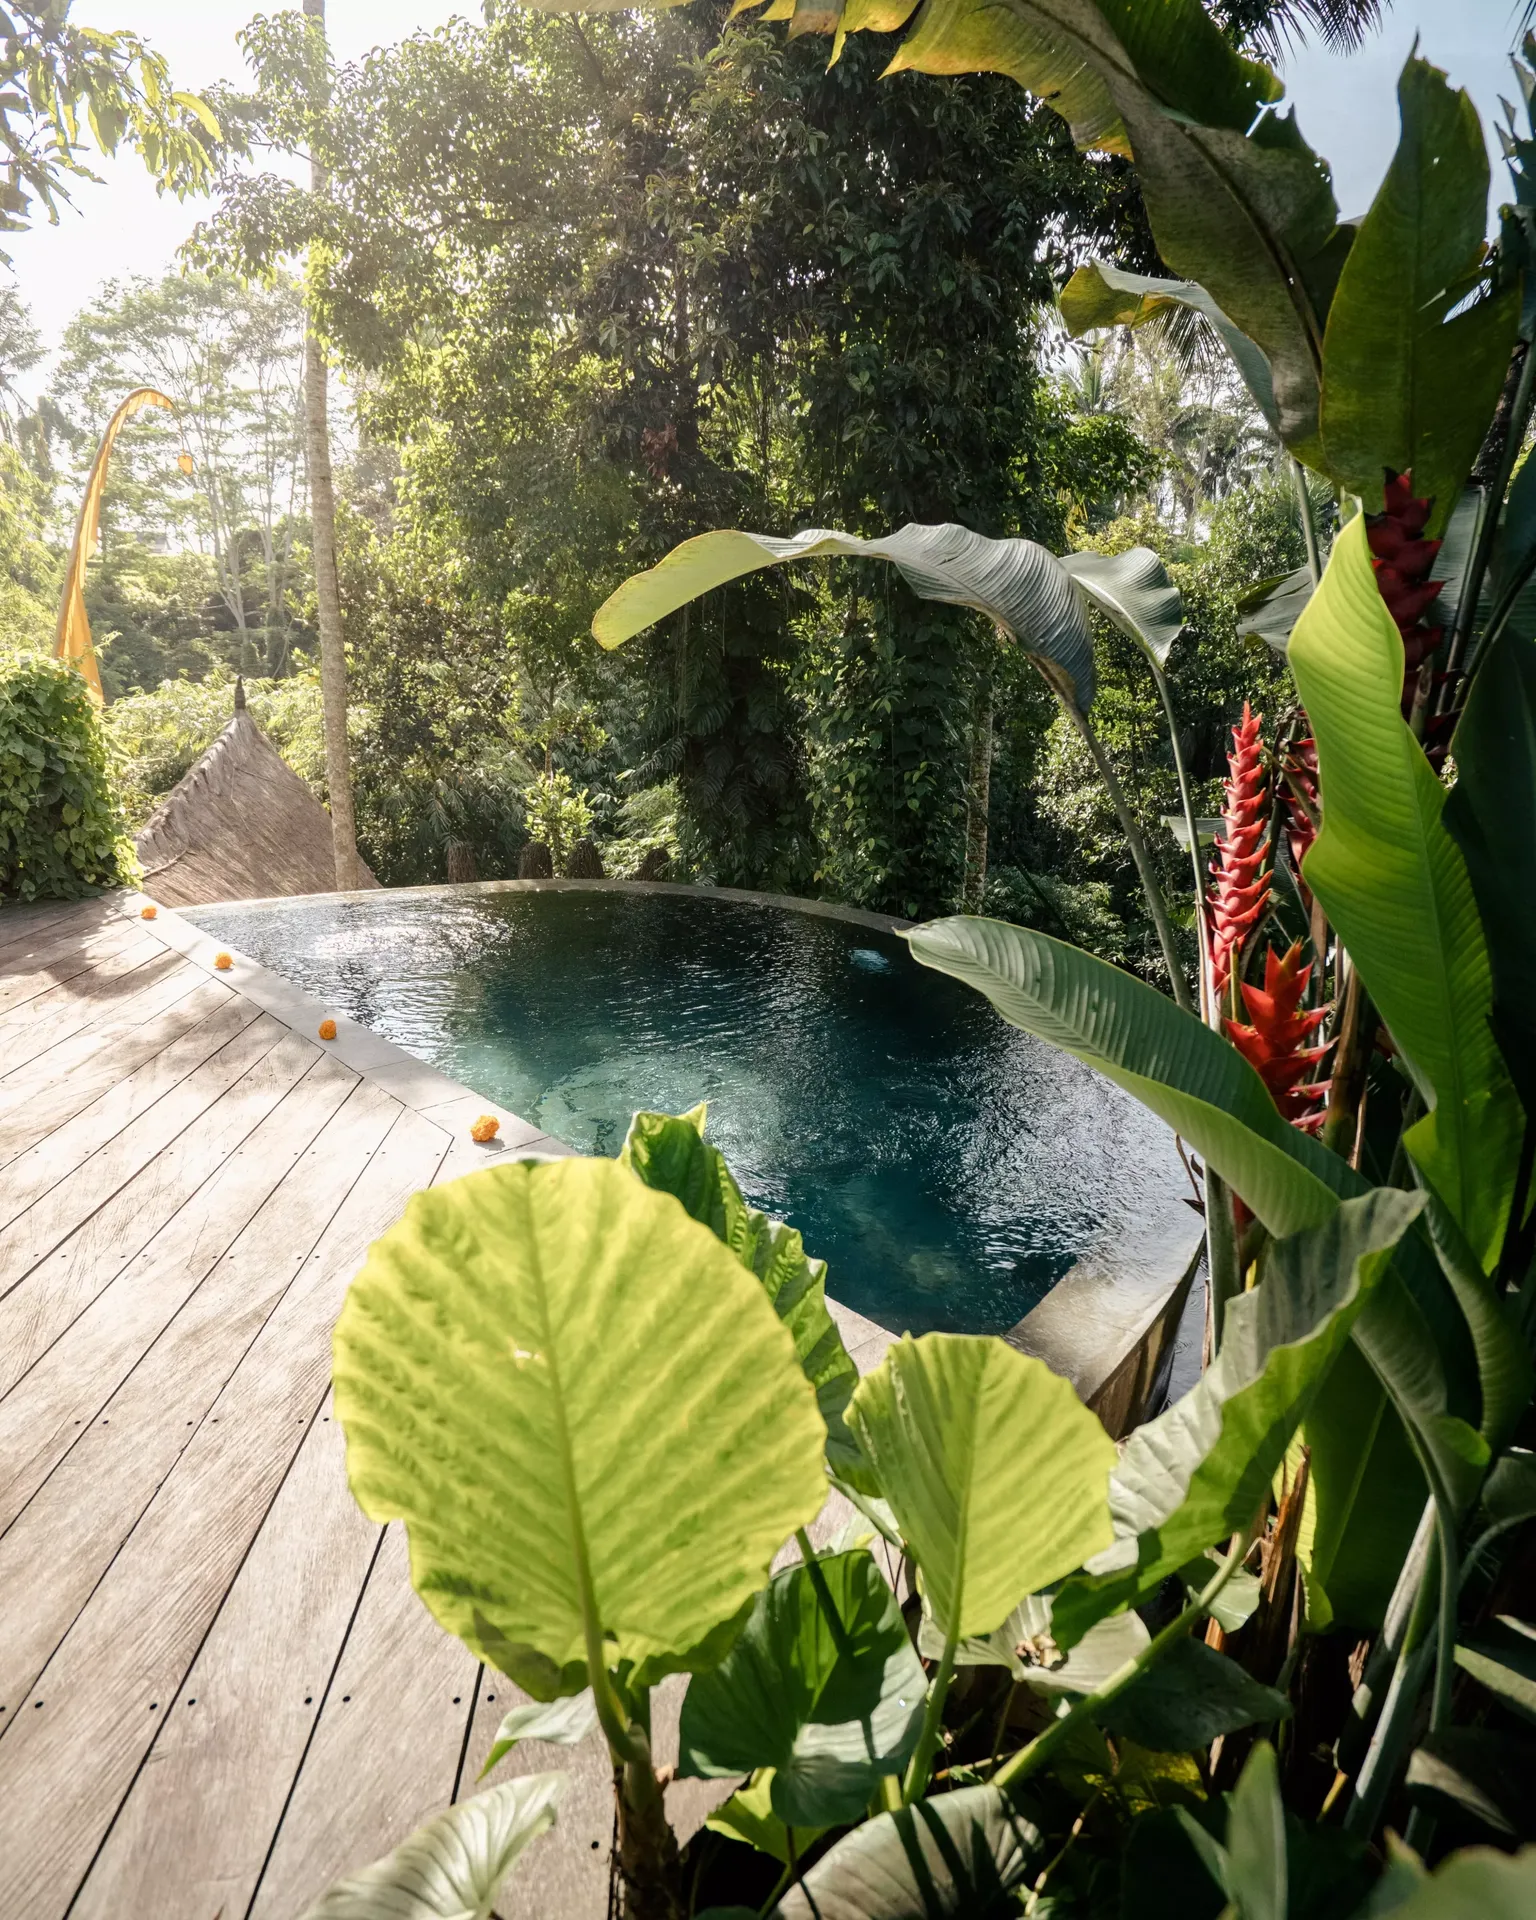 For your comfort and experience here in Bali Firefly Wellness Retreats have rented our very own retreat space. We chose Basandari as it provides the ideal environment to nourish your mind, body, and soul, whilst reconnecting to nature at its finest.